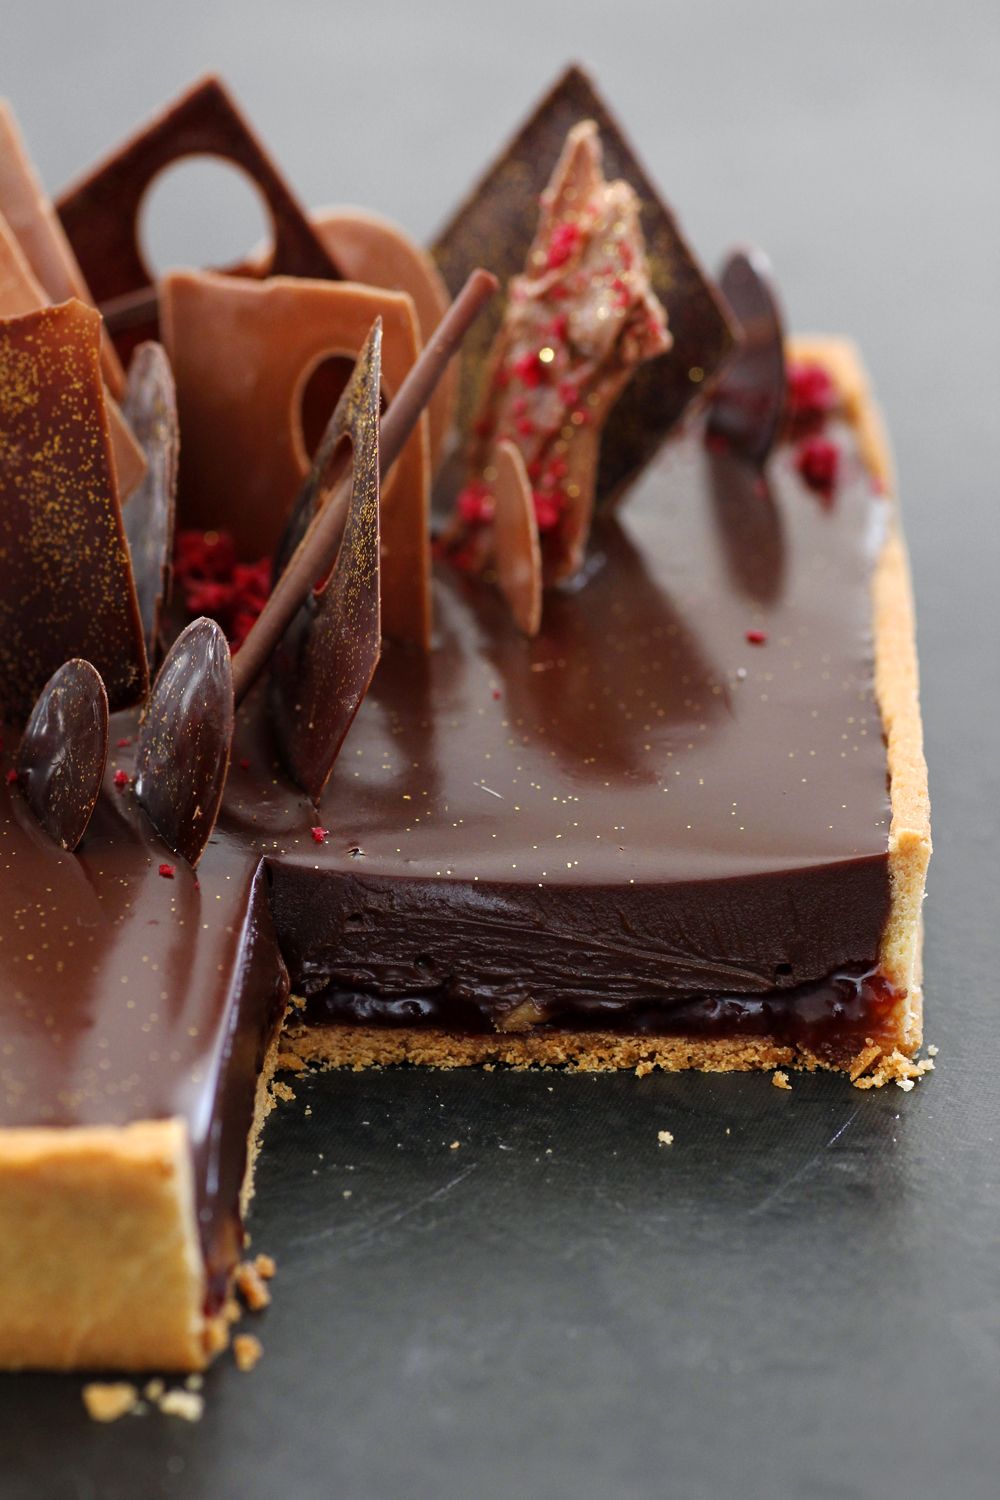 Peanut Butter and Jelly Chocolate Tart